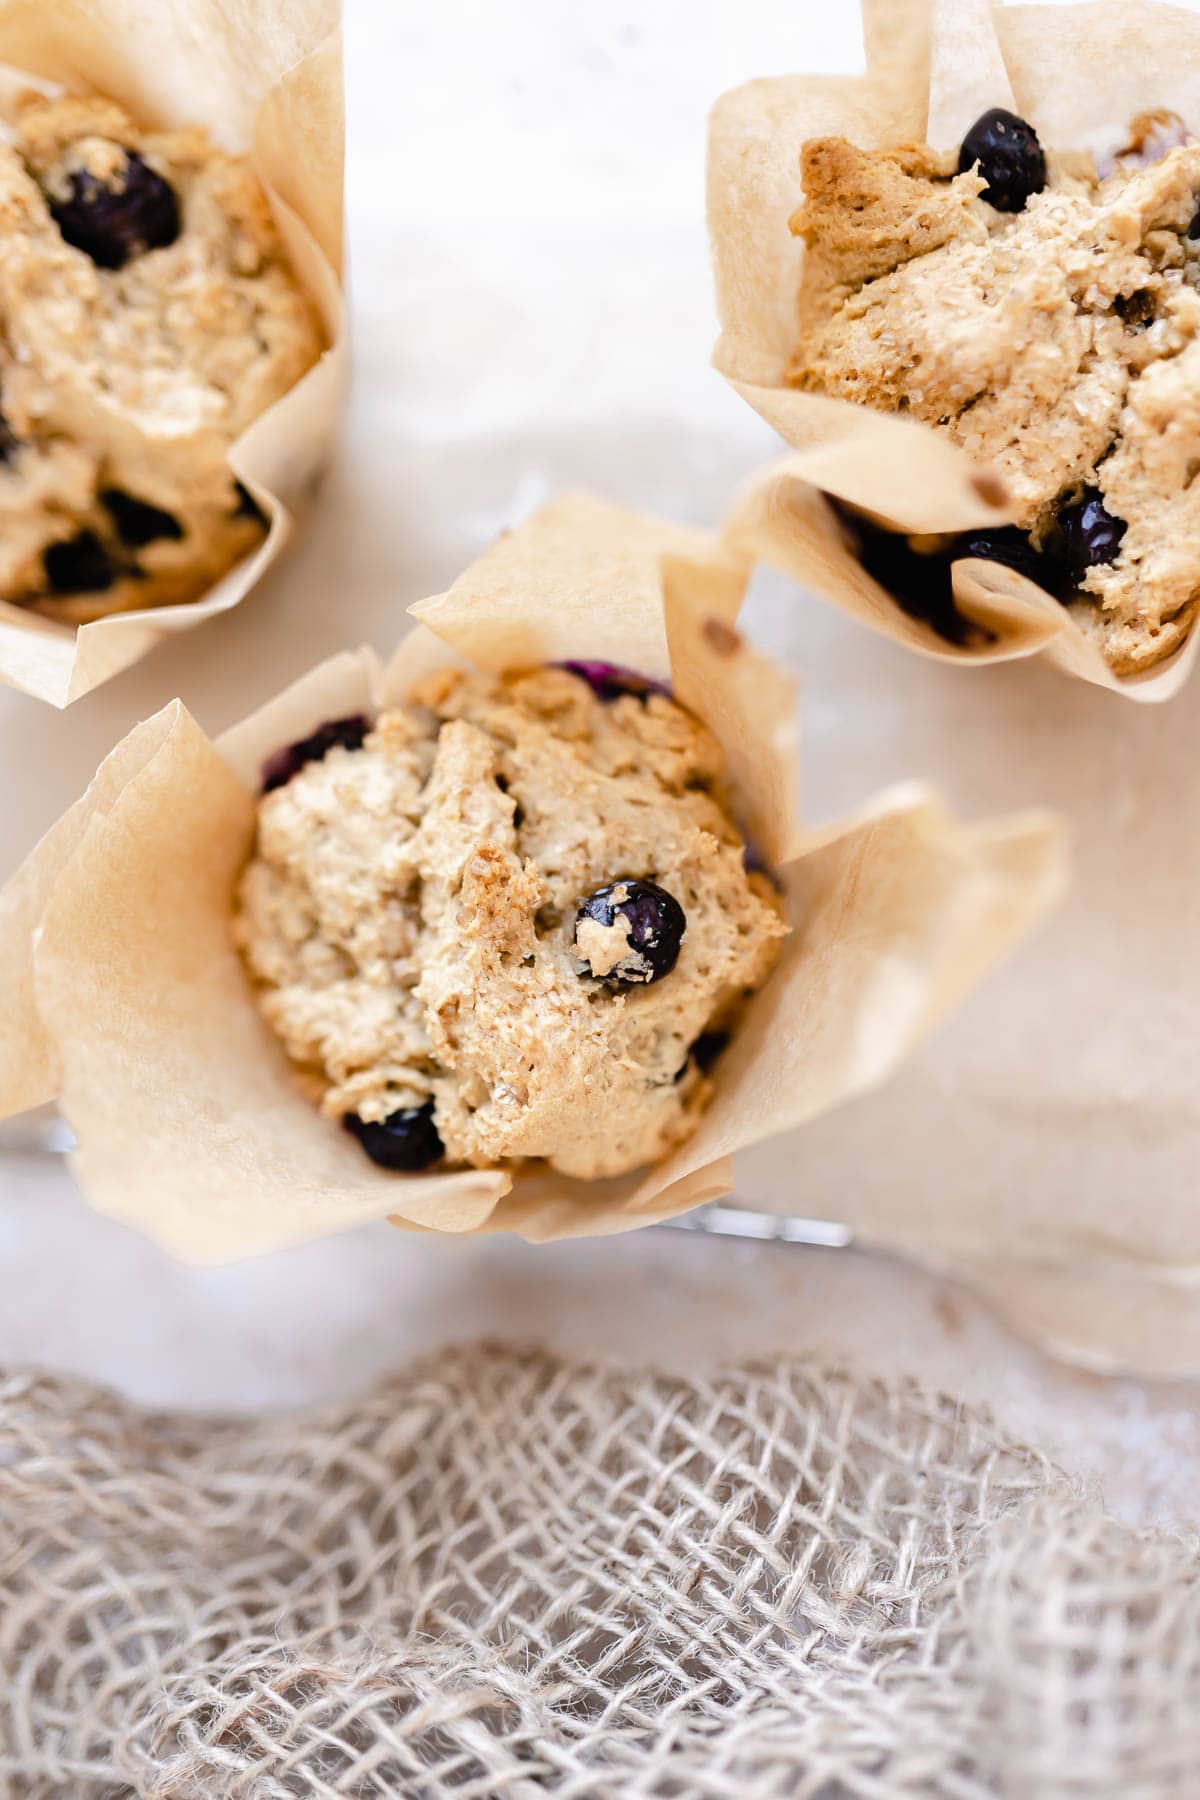 a close up view of a gluten free blueberry muffin wrapped in parchment paper.